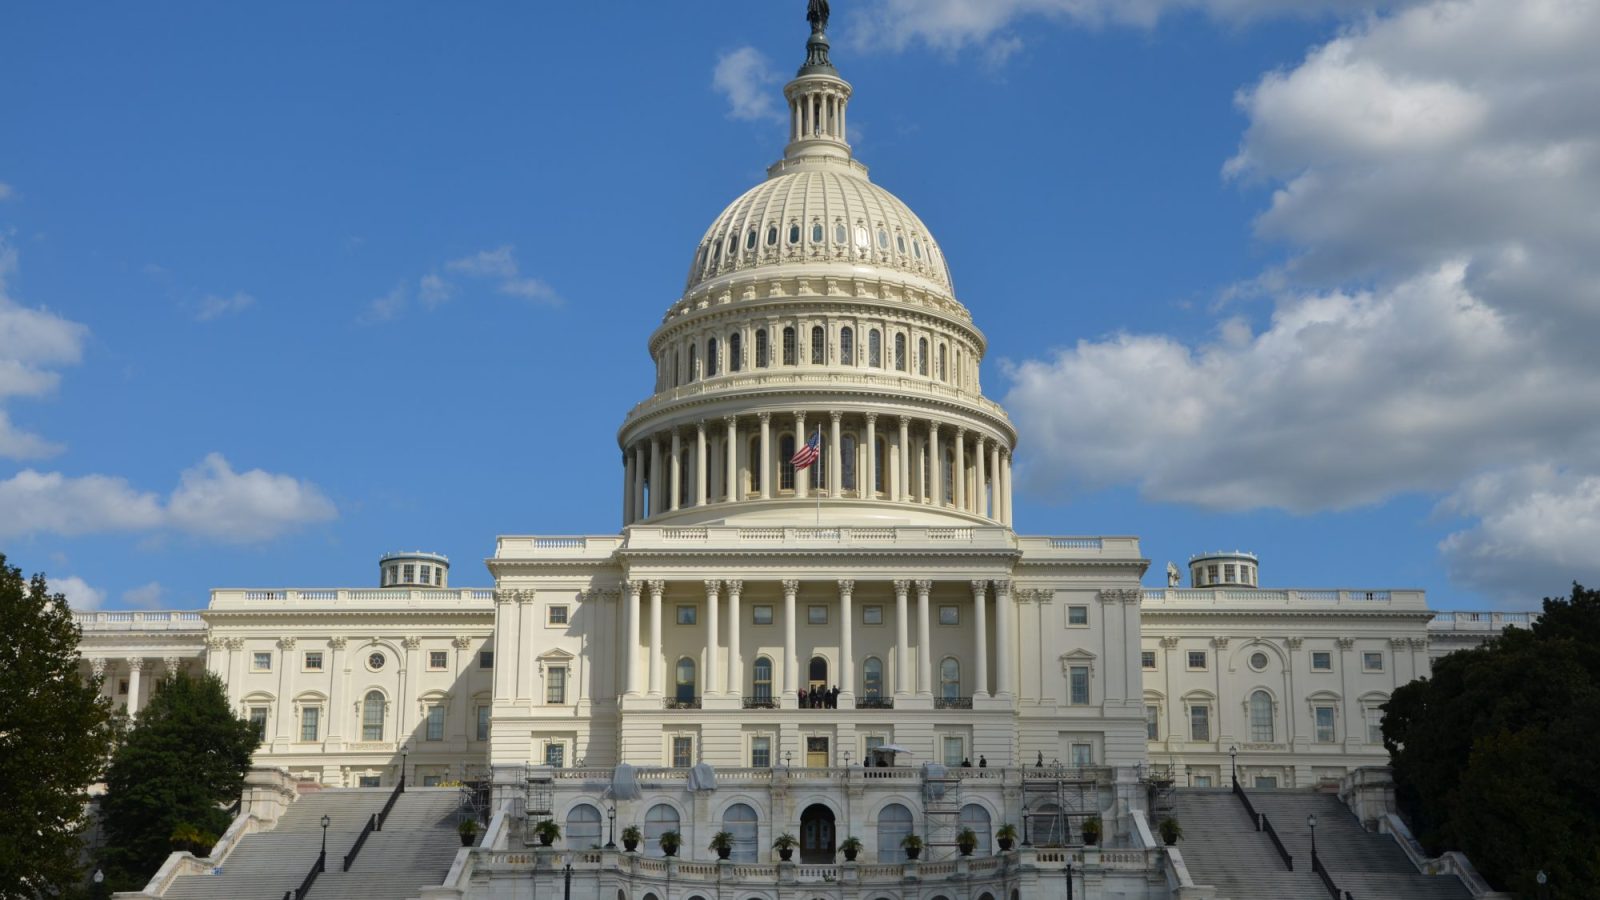 Image of the U.S. Capitol